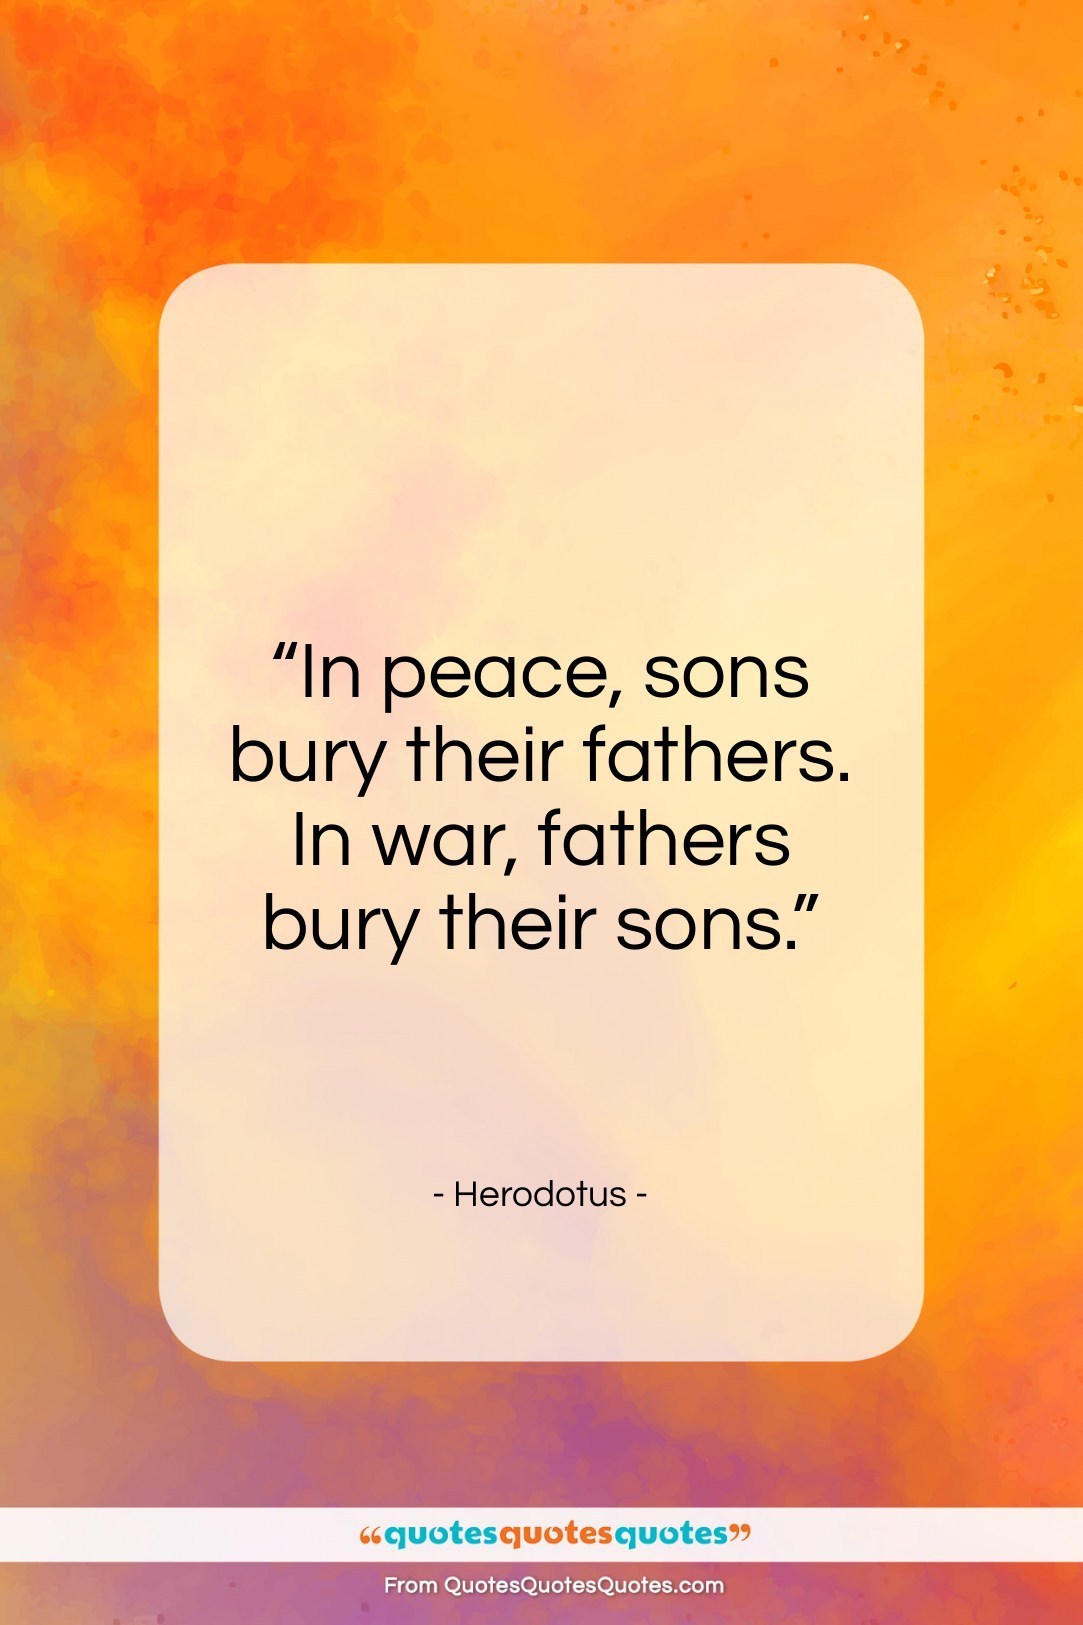 in peace, sons bury their fathers. in war, fathers bury their sons. herodotus